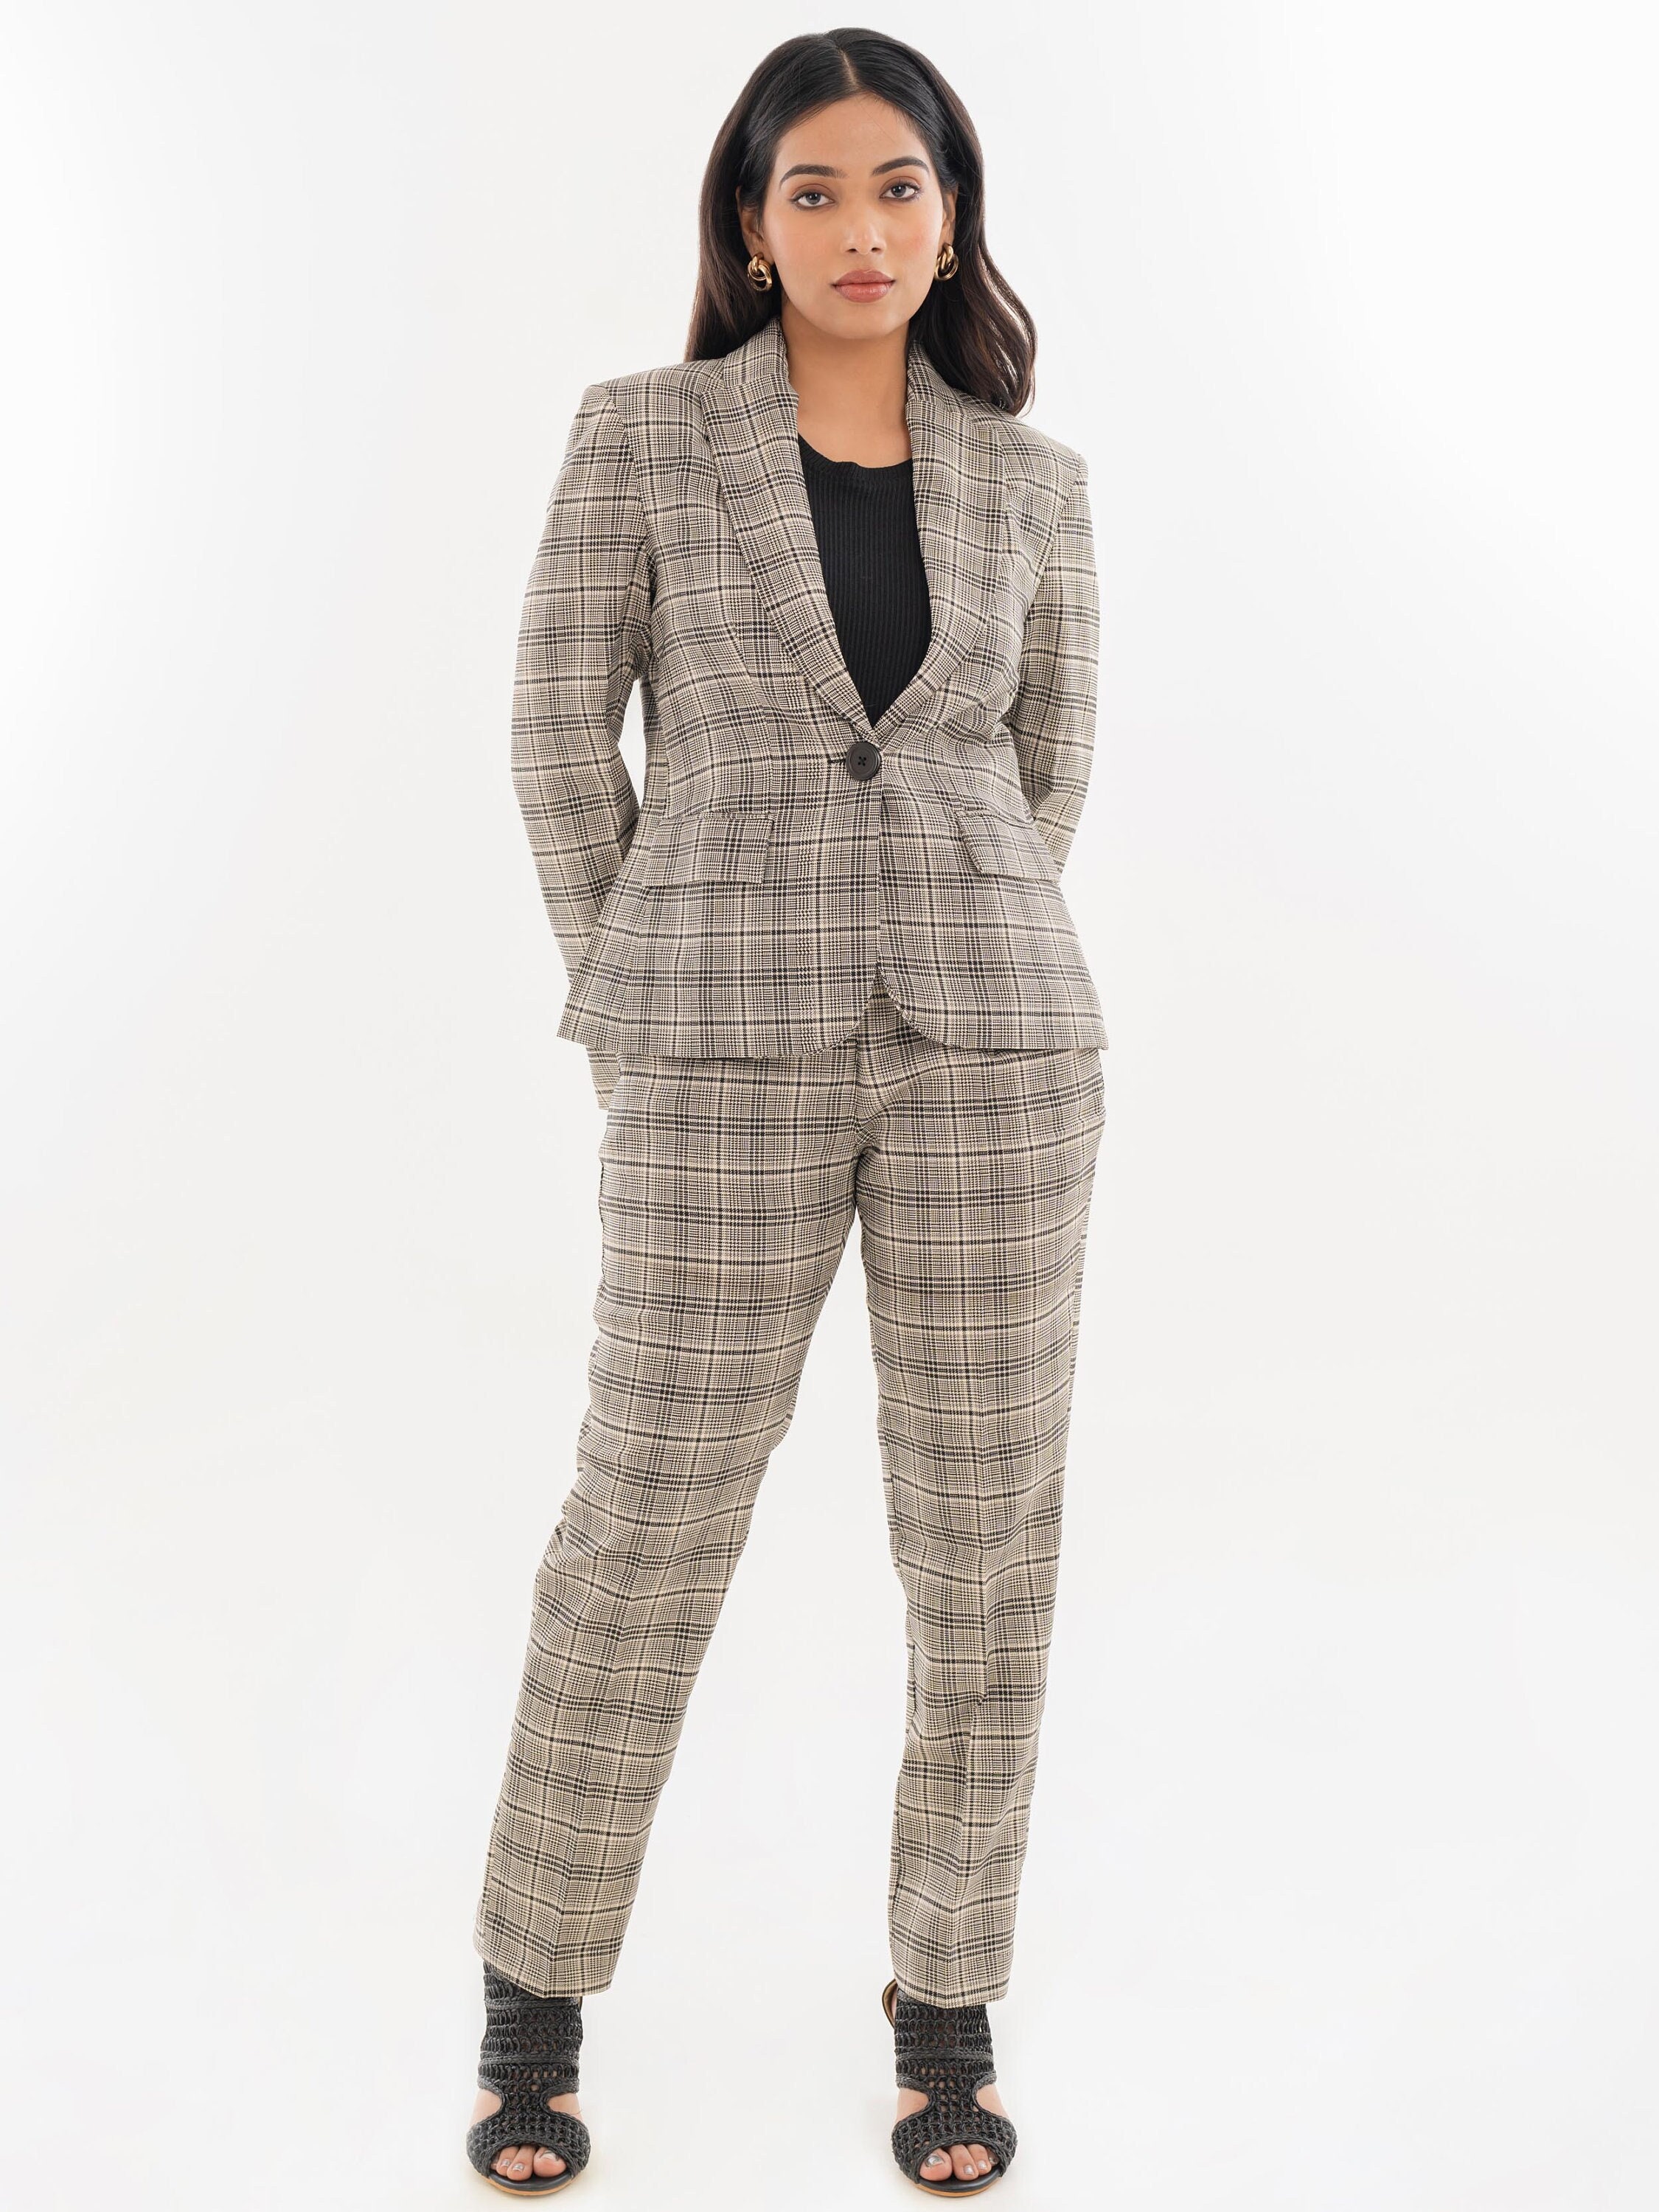 Long-sleeved Two-piece Suit, Women's Suit, Blazer and Pants, Suit for Women,  Suit for Ladies, Office Wear, Pink Blazer Suits, Formal Outfits 